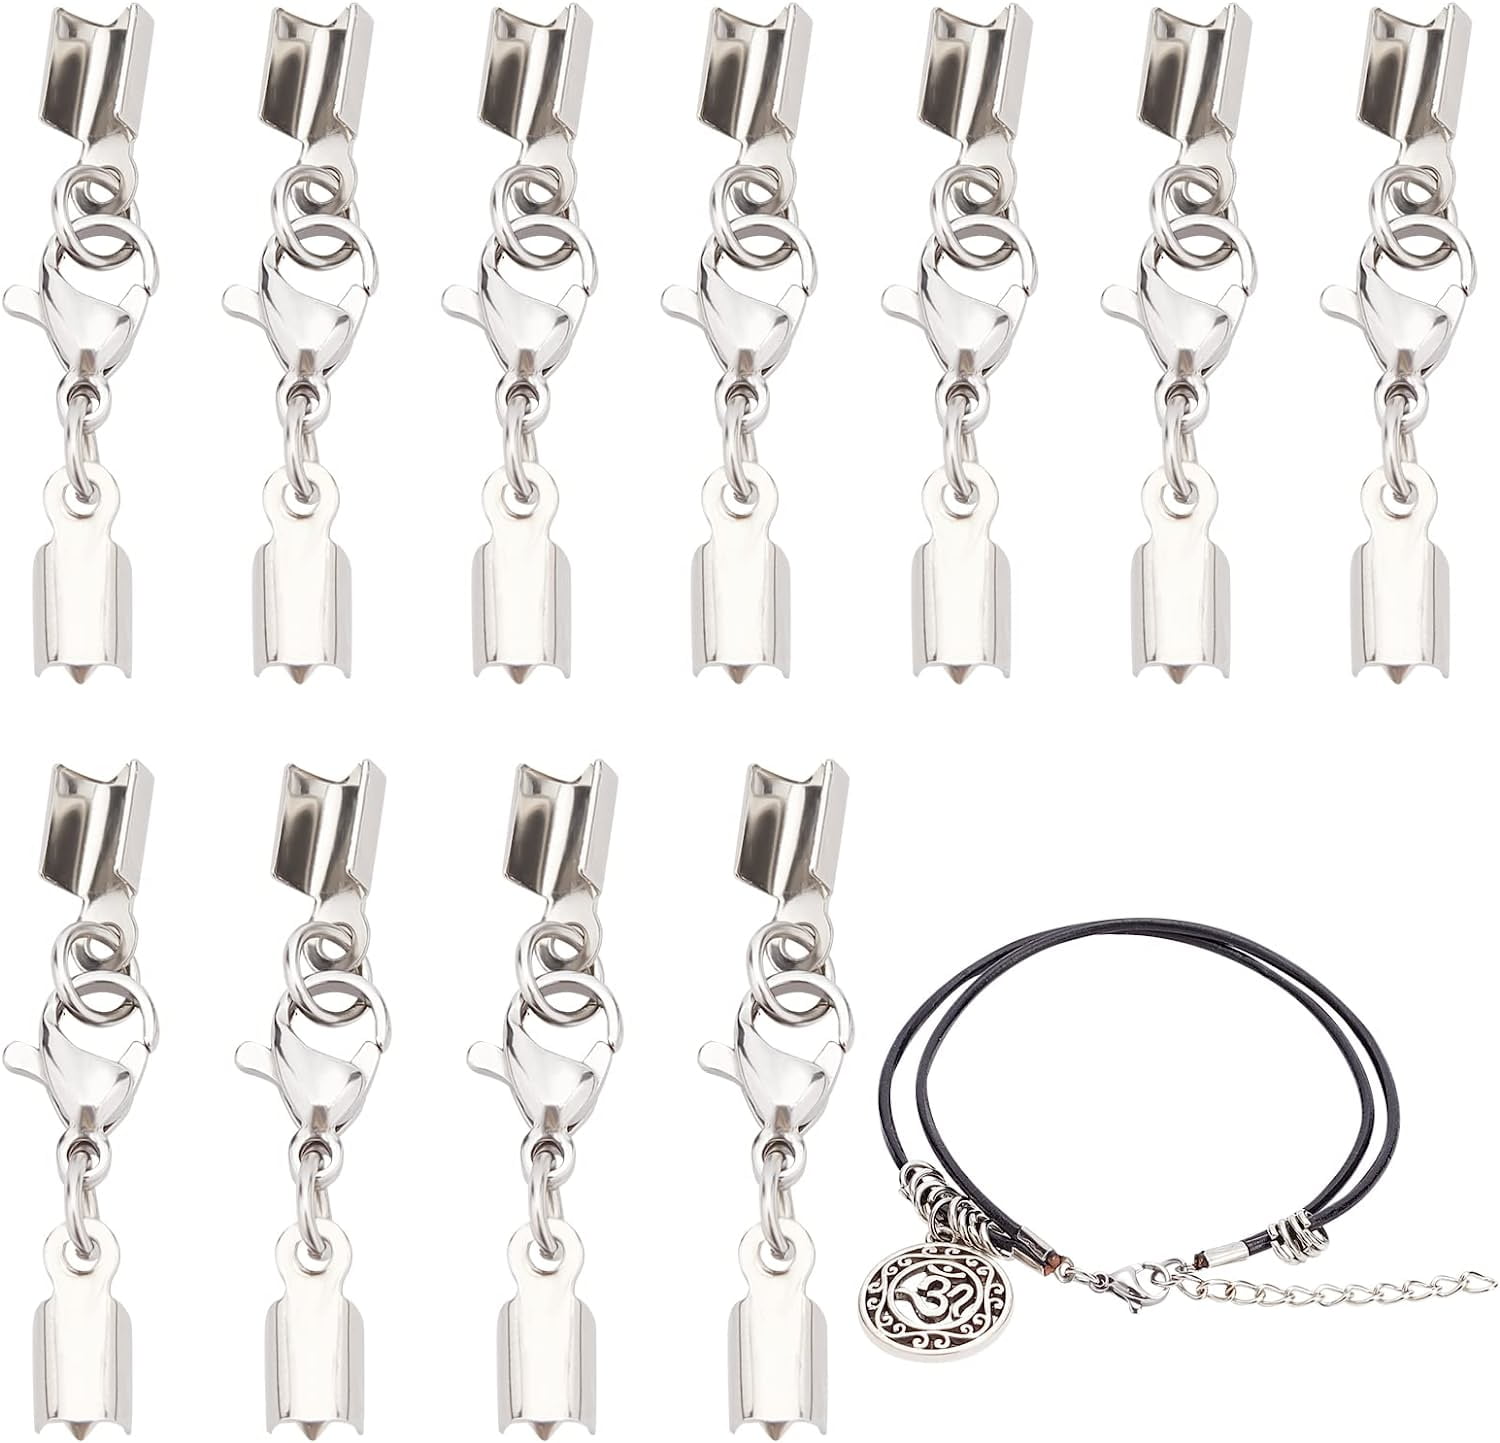 Silver Etched Clasps, Bracelets & Necklaces Jewellery Making 6pcs in Pack E  - Silver | Catch.com.au